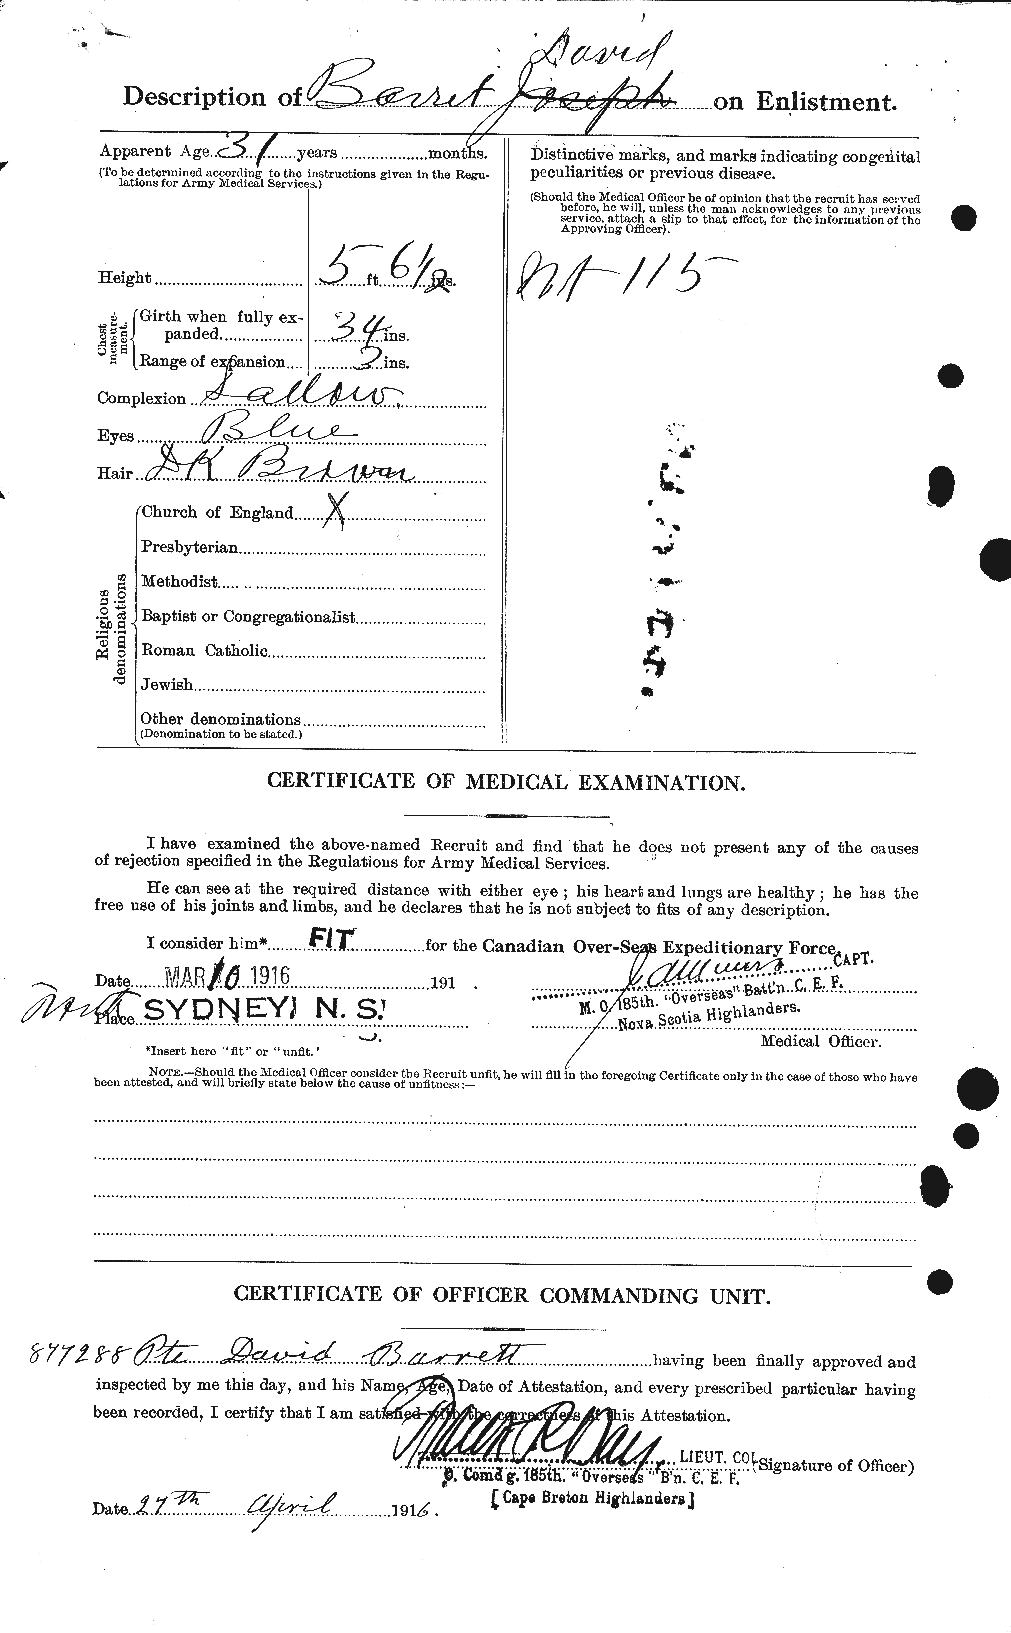 Personnel Records of the First World War - CEF 220364b